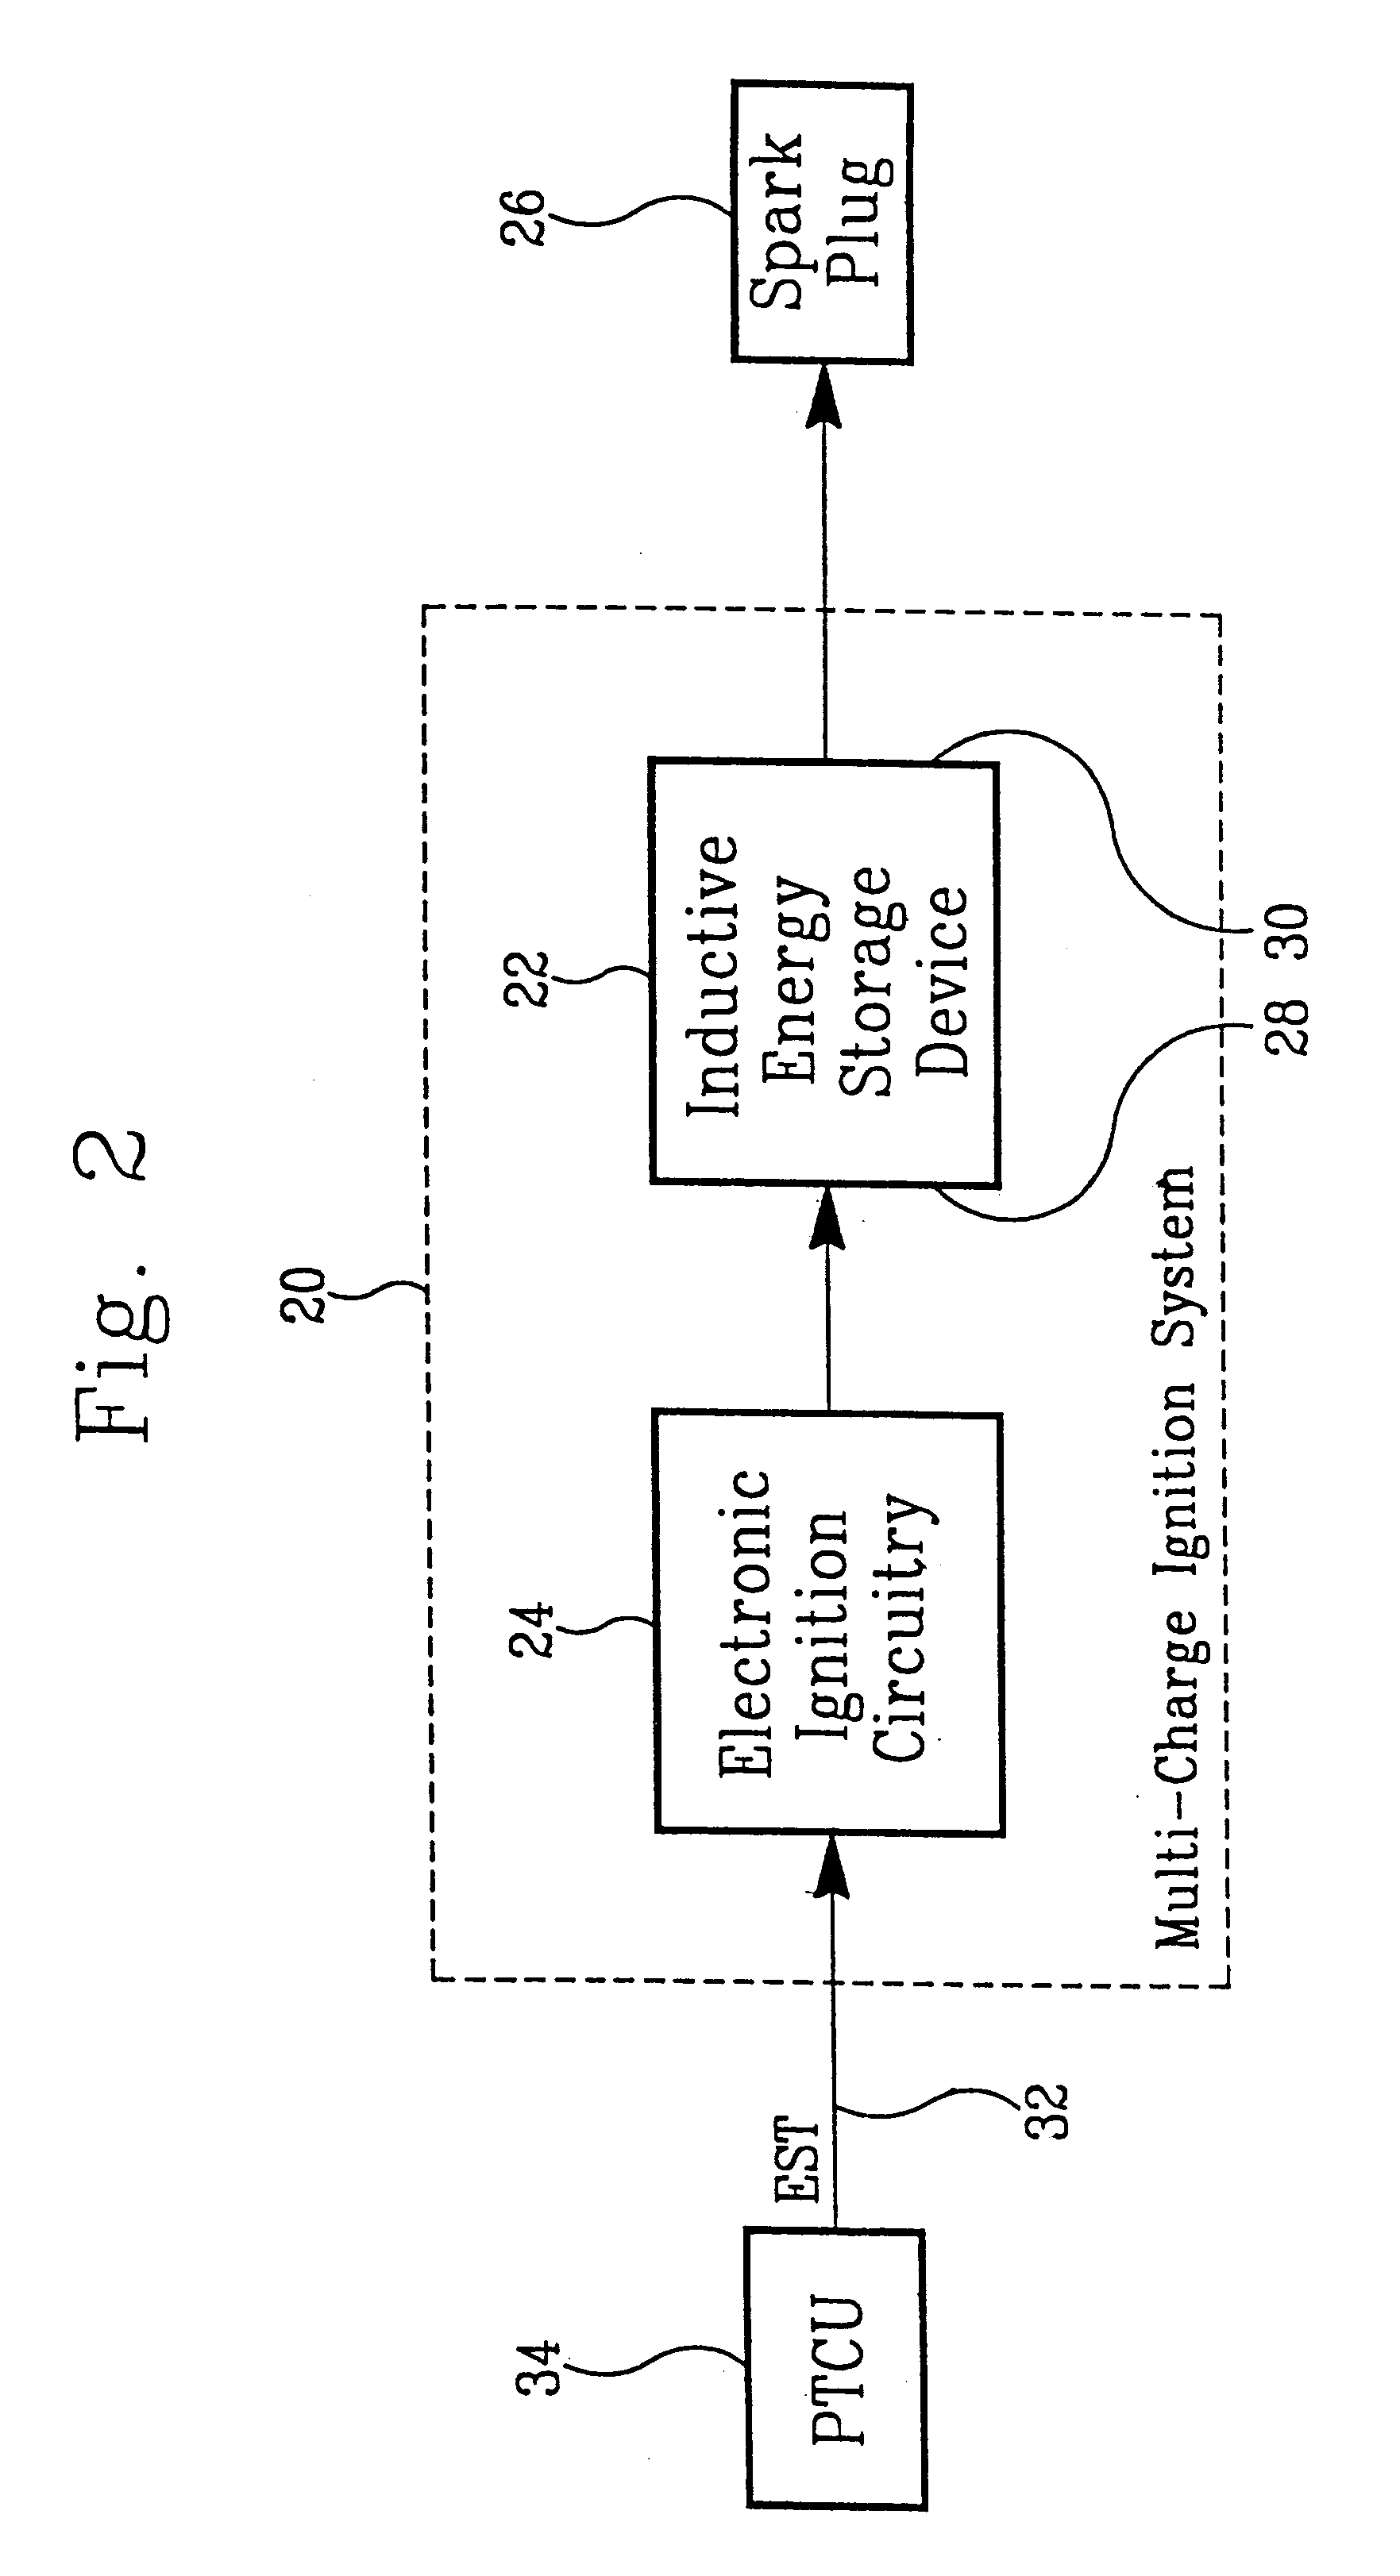 System and method for providing multicharge ignition